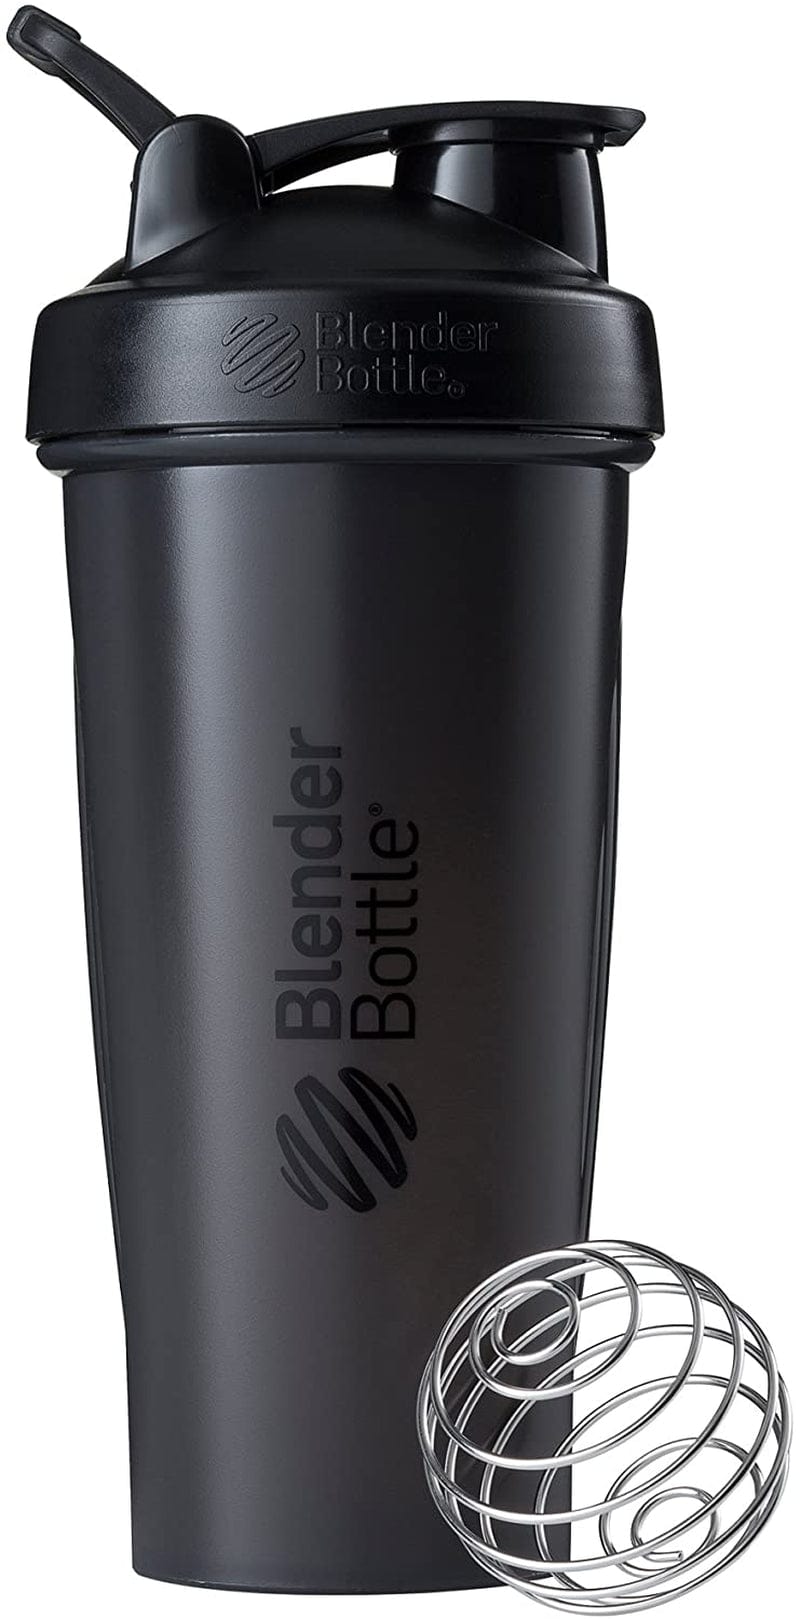 Blenderbottle Classic Shaker Bottle Perfect for Protein Shakes and Pre Workout, 20-Ounce, Clear/Black/Black & Classic V2 Shaker Bottle Perfect for Protein Shakes and Pre Workout, 28-Ounce, Black